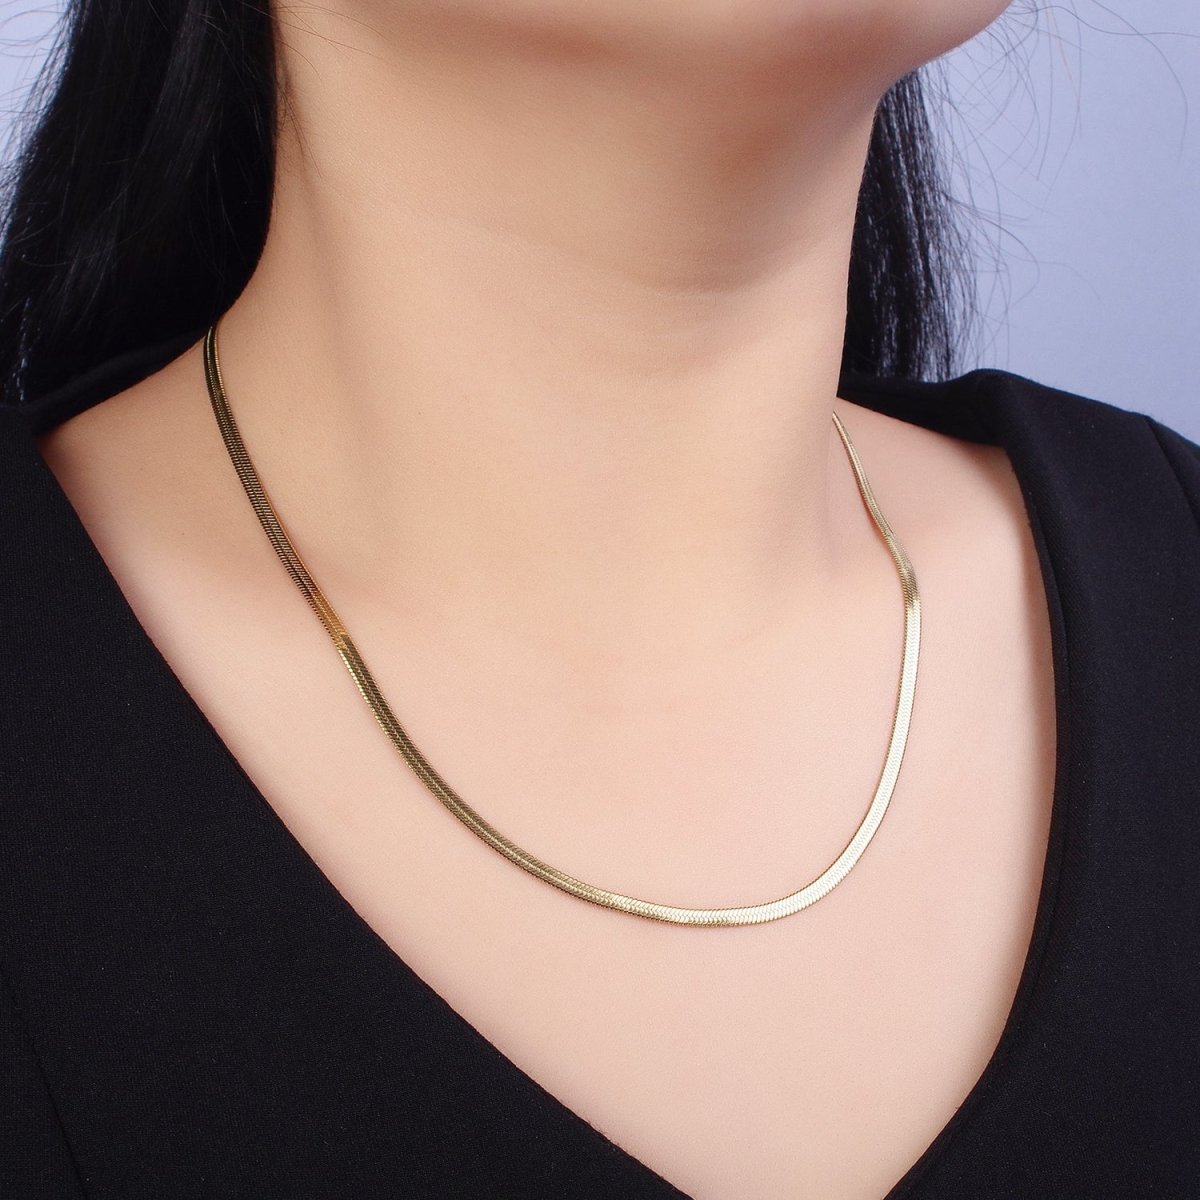 Dainty 2.5mm Gold Herringbone Chain Necklace Silver Flat Snake Chain Stainless Steel Chain 18 inch | WA-1552 WA-1553 Clearance Pricing - DLUXCA